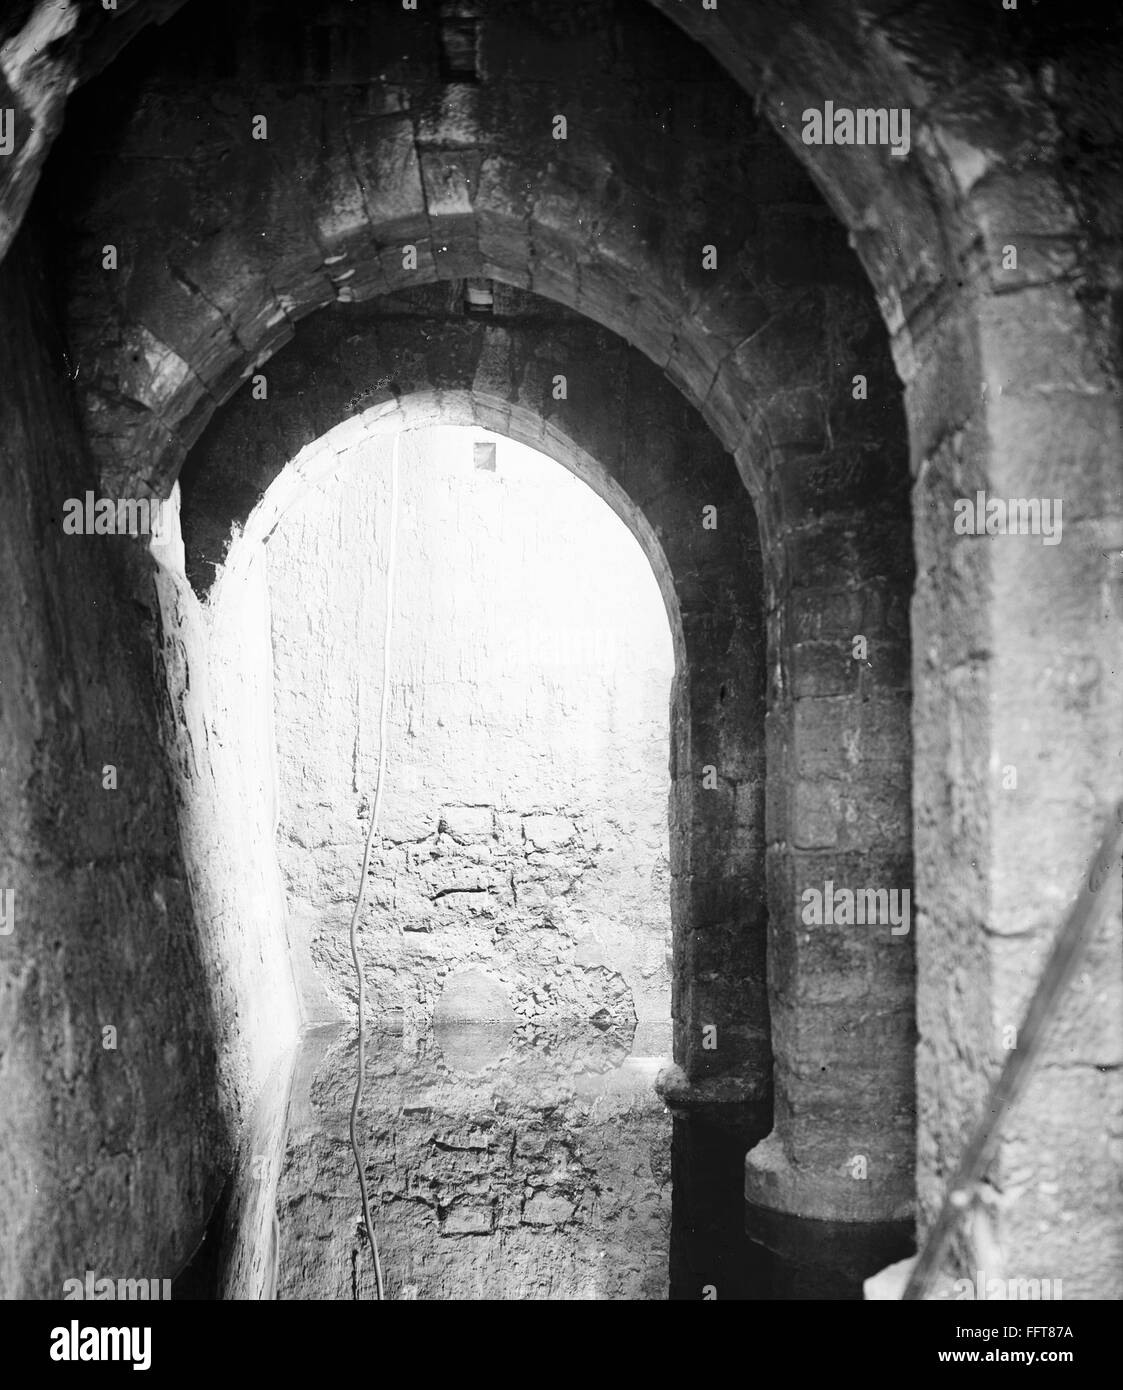 POOL OF BETHESDA. /nThe Pool of Bethesda in Jerusalem. Photograph, early 20th century. Stock Photo